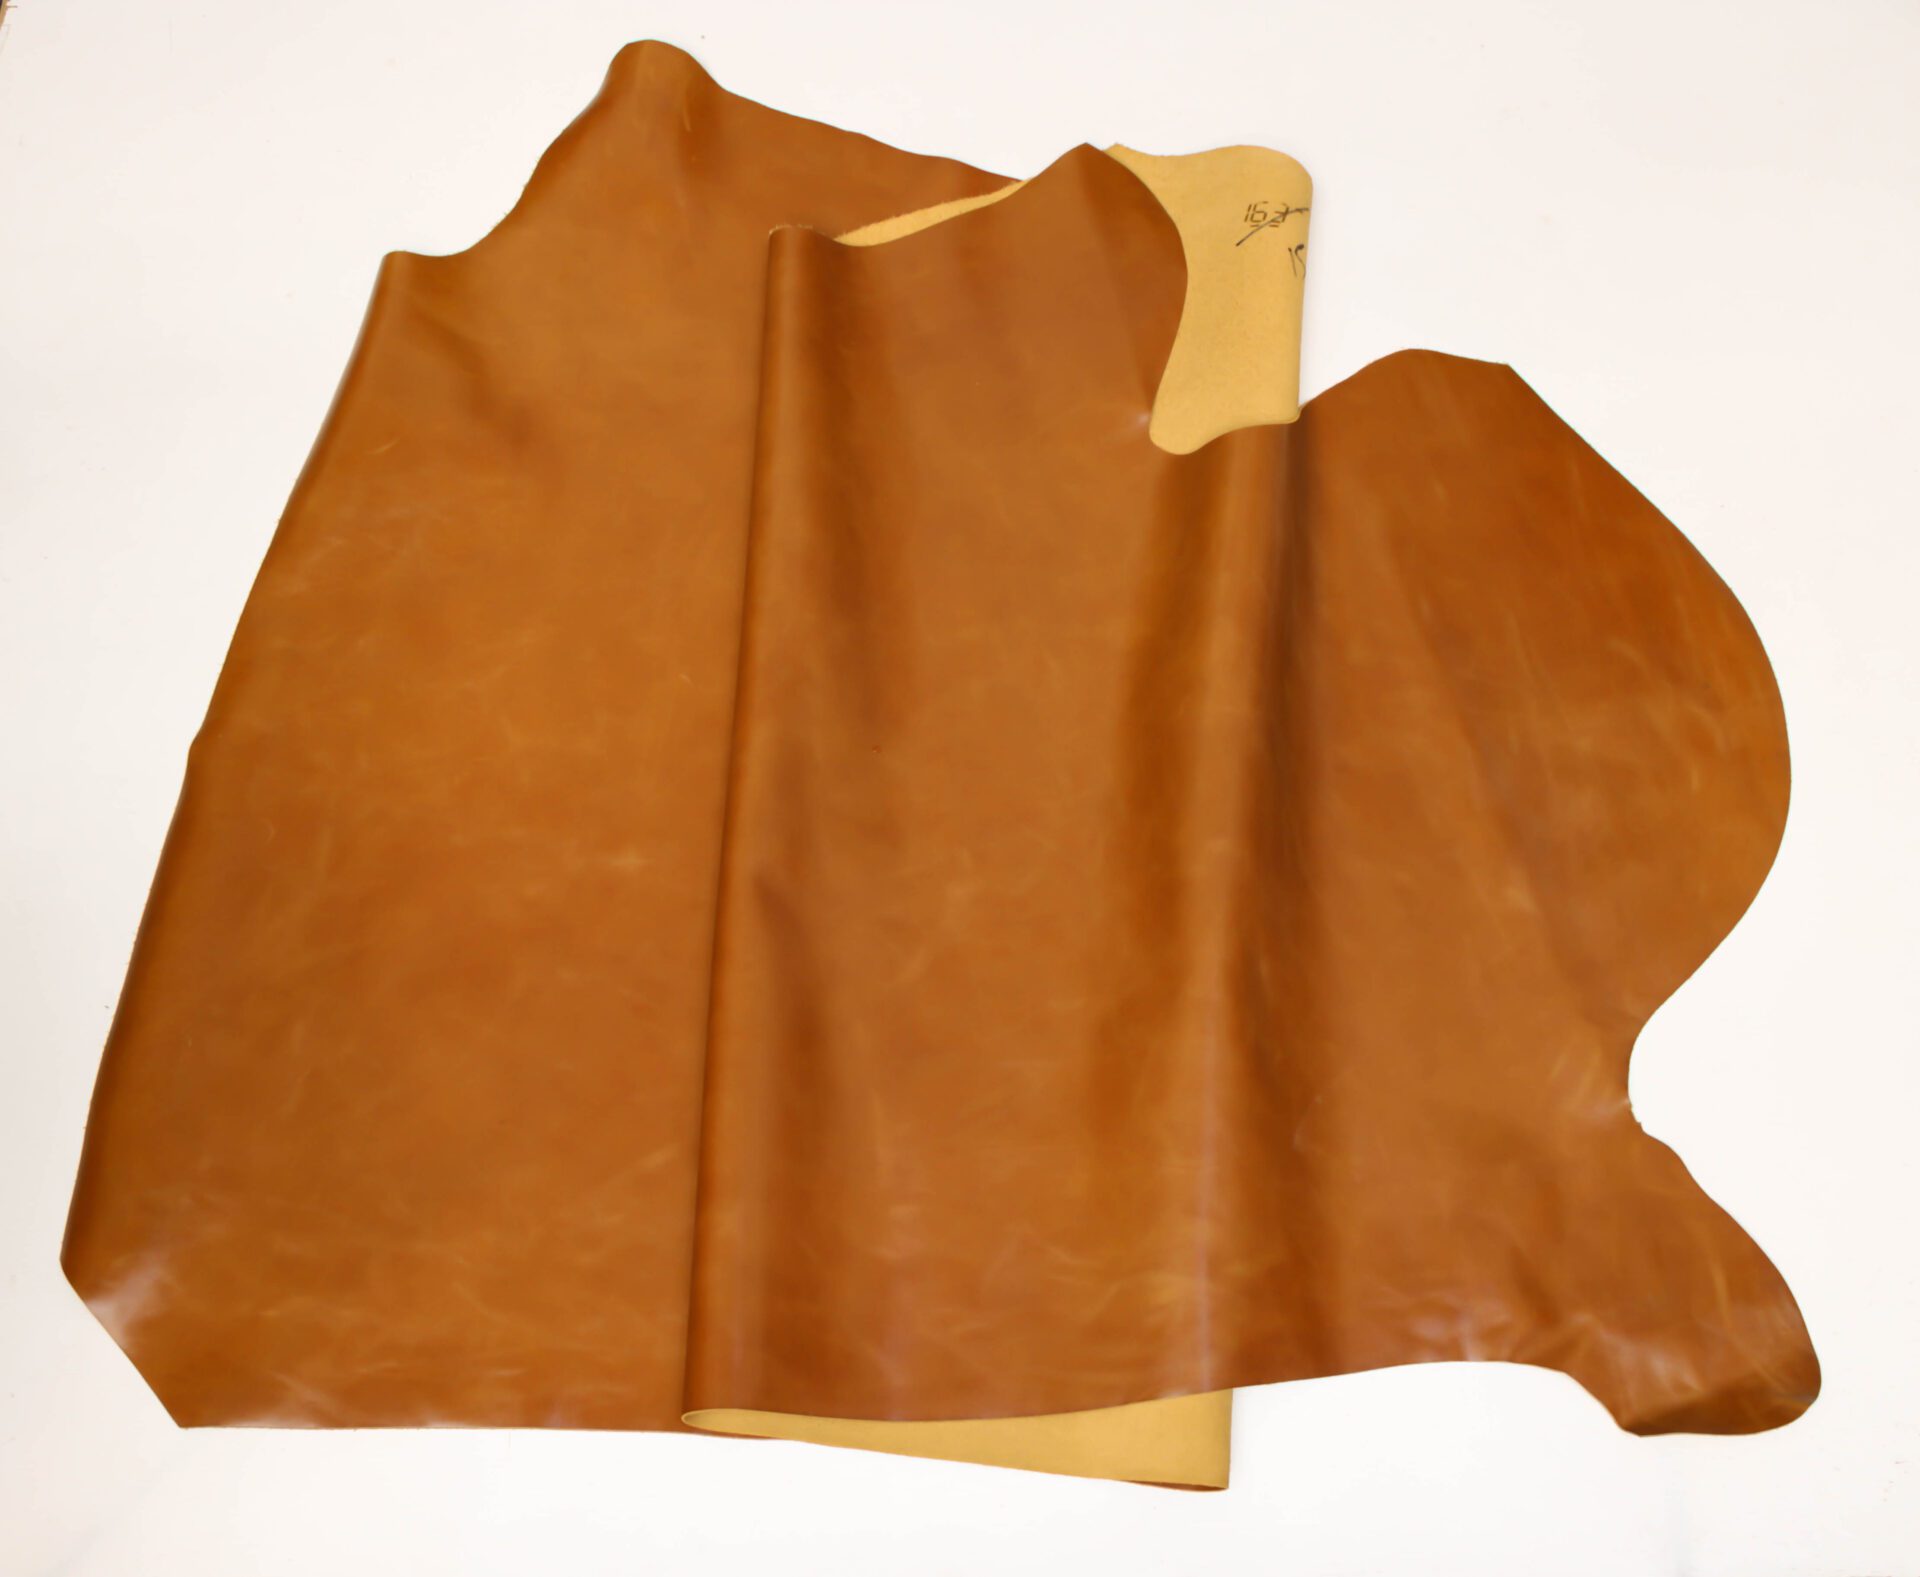 ABE Leather HIDES Cow Skins Various Colors & Sizes Burgundy, 12 x 24 